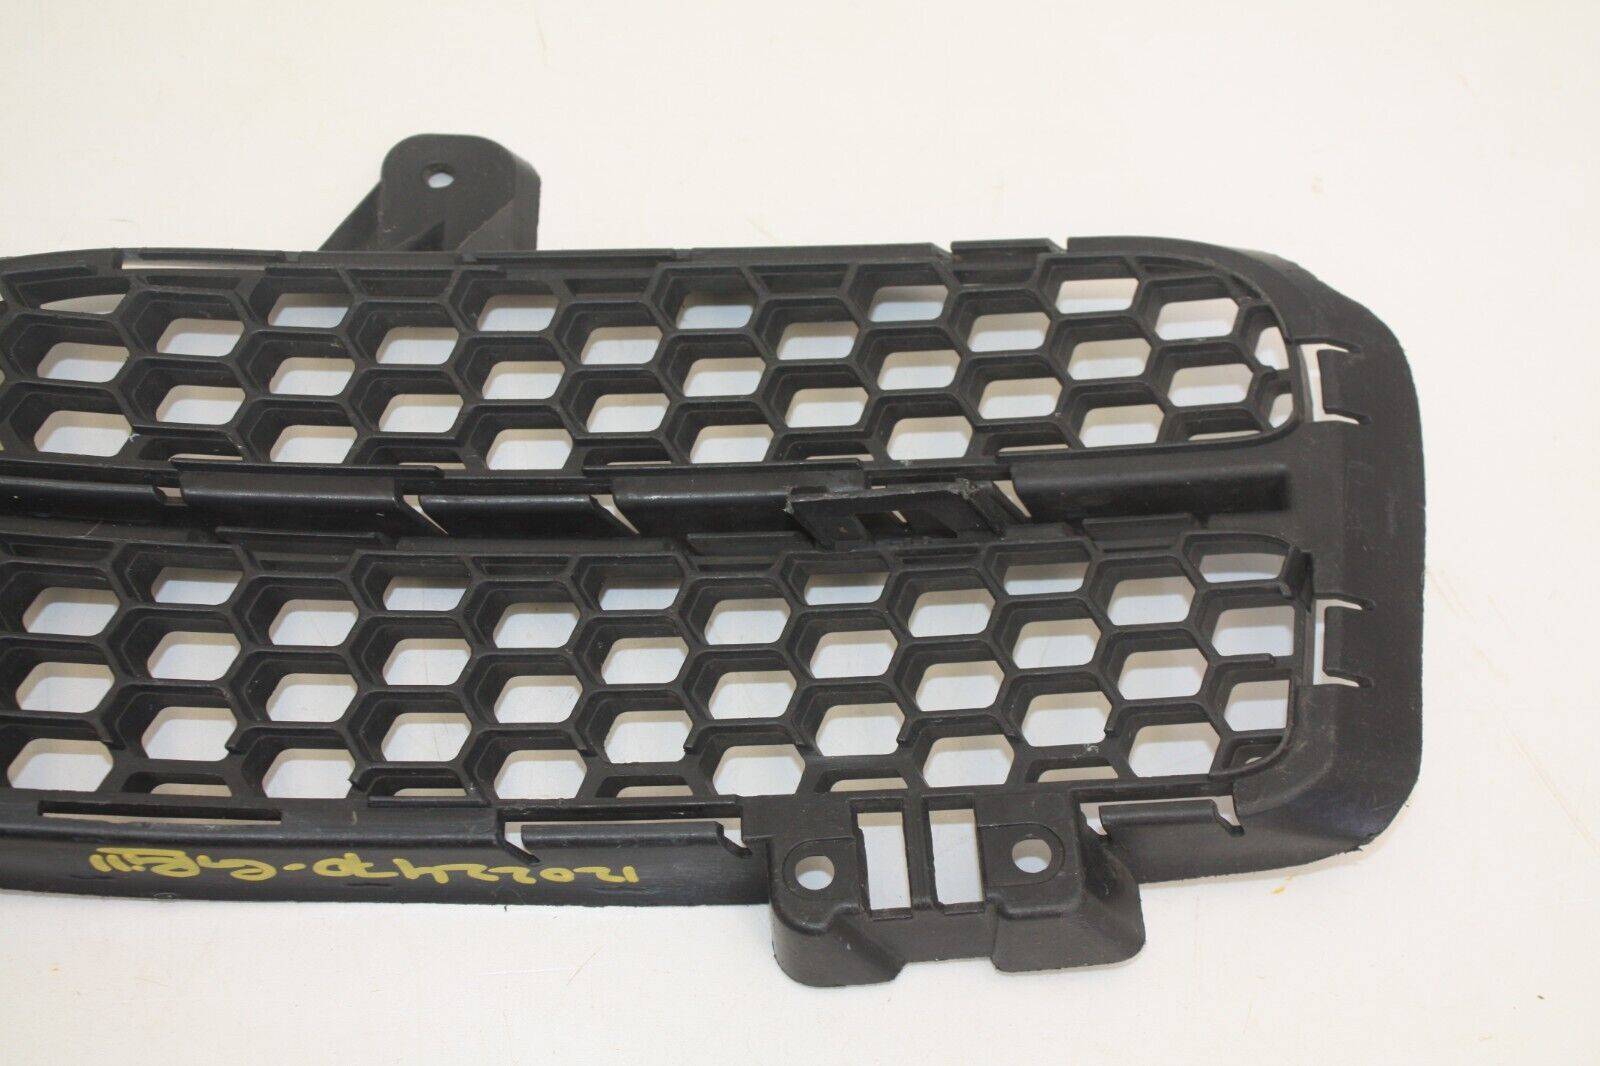 VW-Touareg-Front-Bumper-Right-Grill-2007-TO-2010-7L6853666B-Genuine-176241219097-5